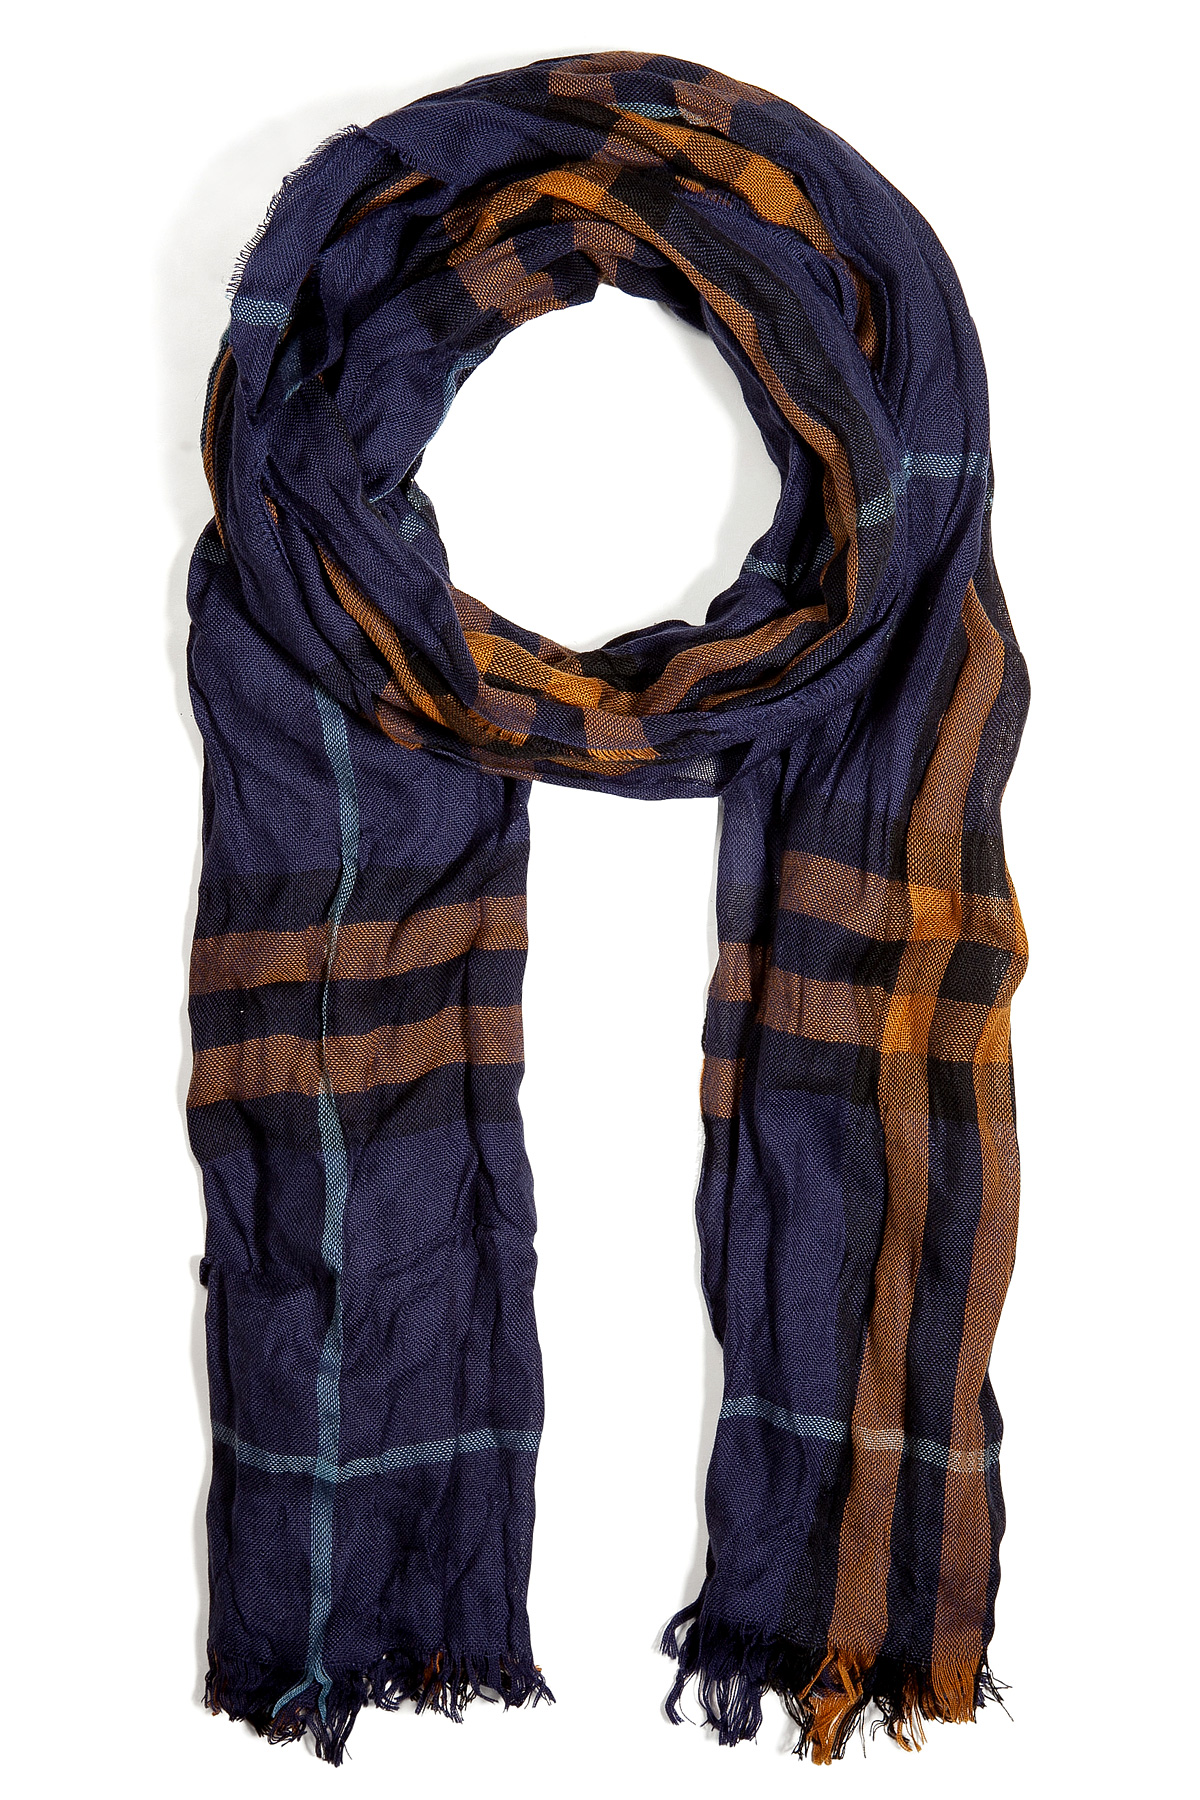 Burberry Merino Wool-cashmere Giant Check Crinkled Scarf in Navy Blue ...